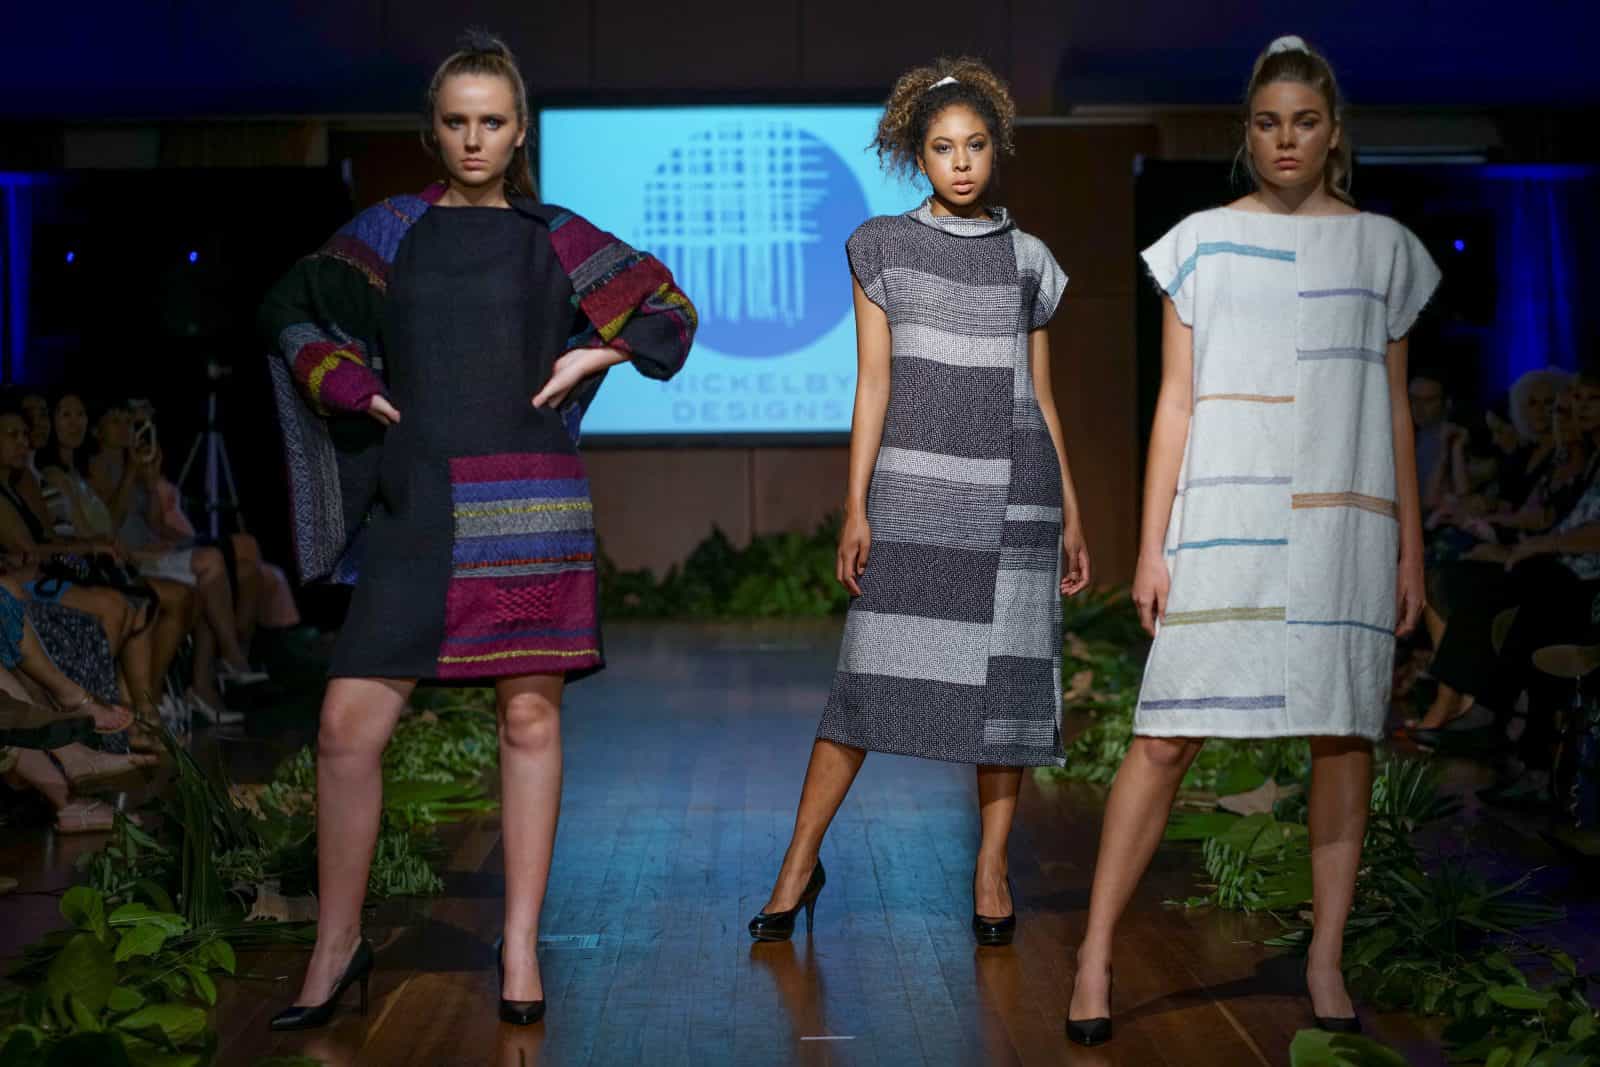 Nickelby Designs on the catwalk at Eco Fashion Week Australia